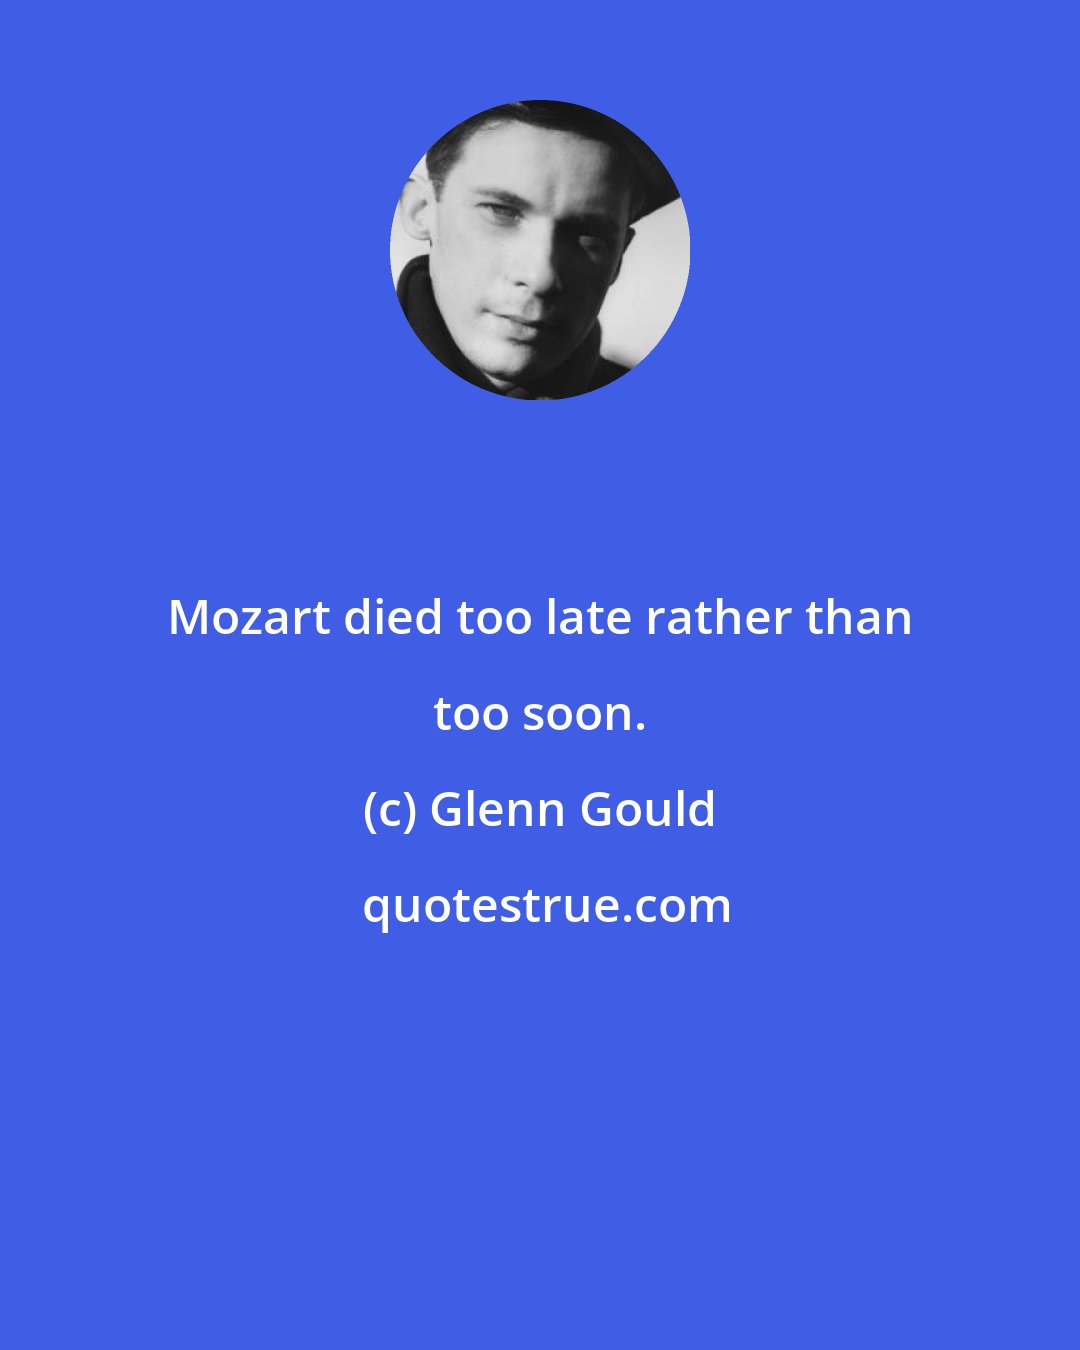 Glenn Gould: Mozart died too late rather than too soon.